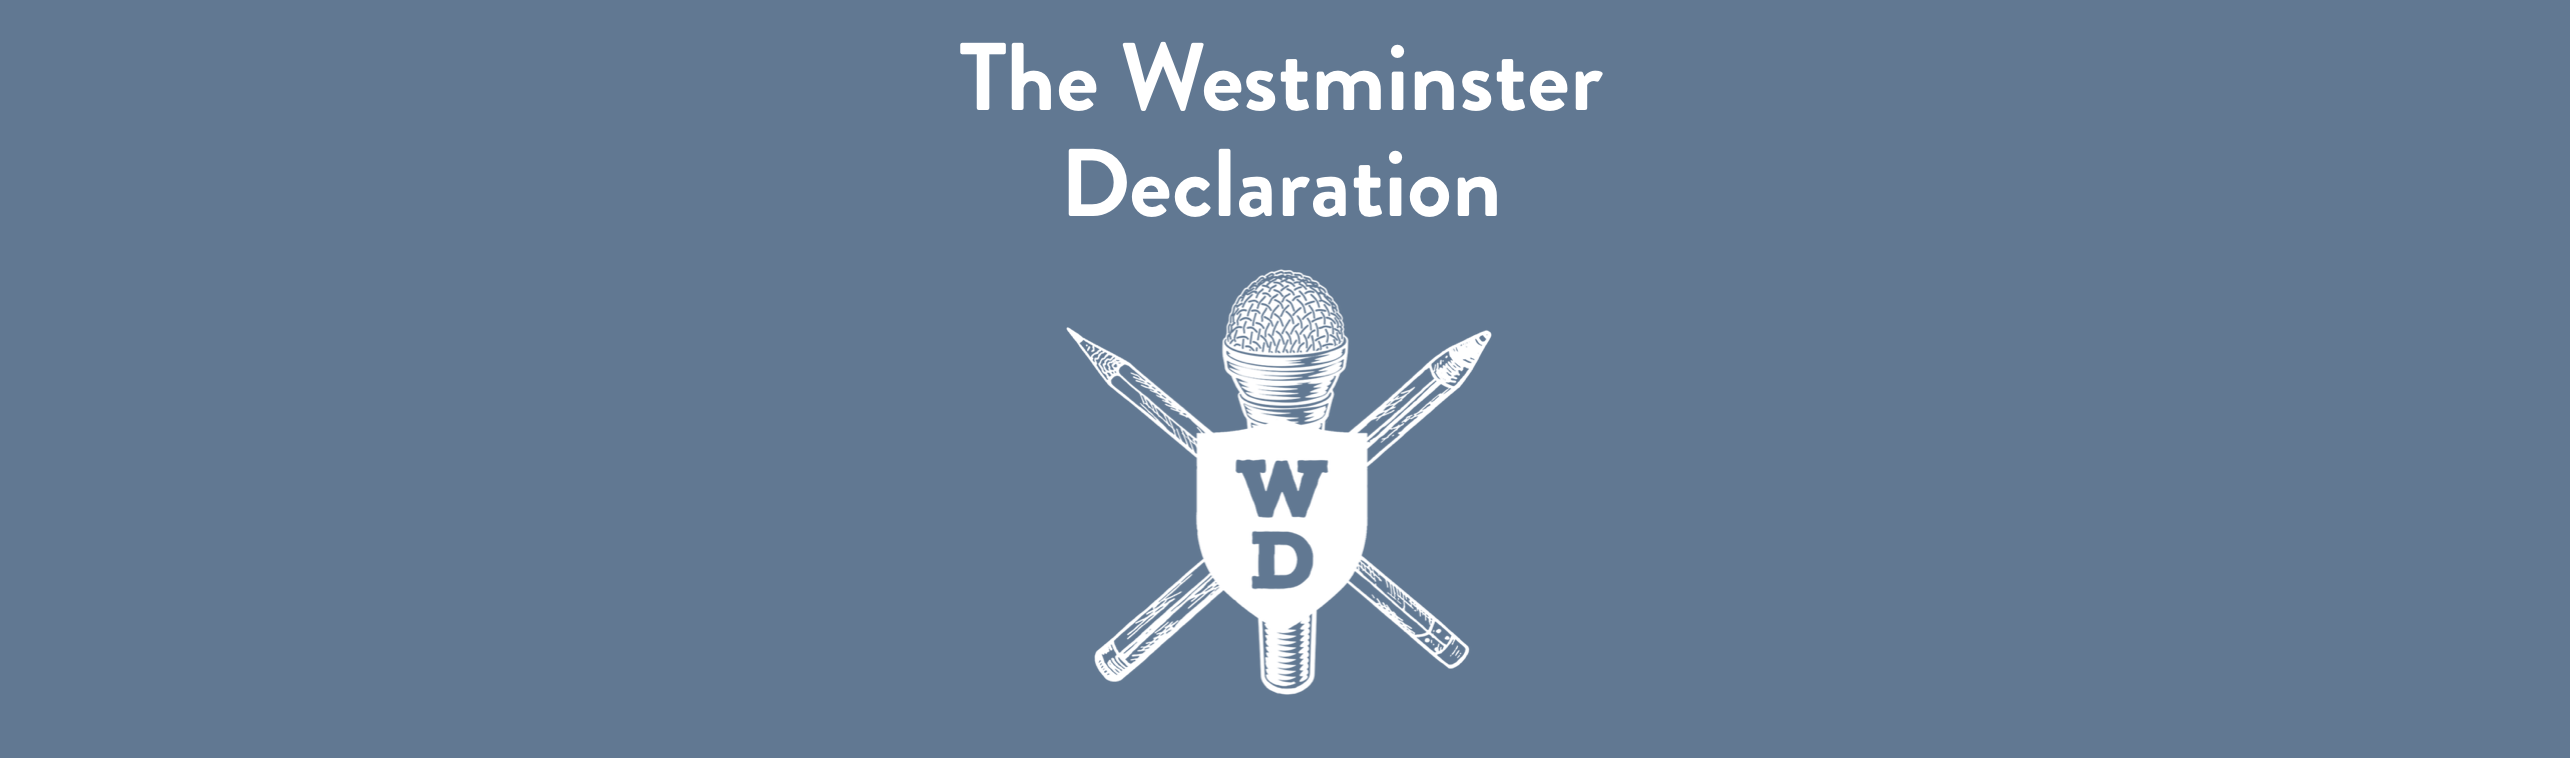 The Westminster Declaration